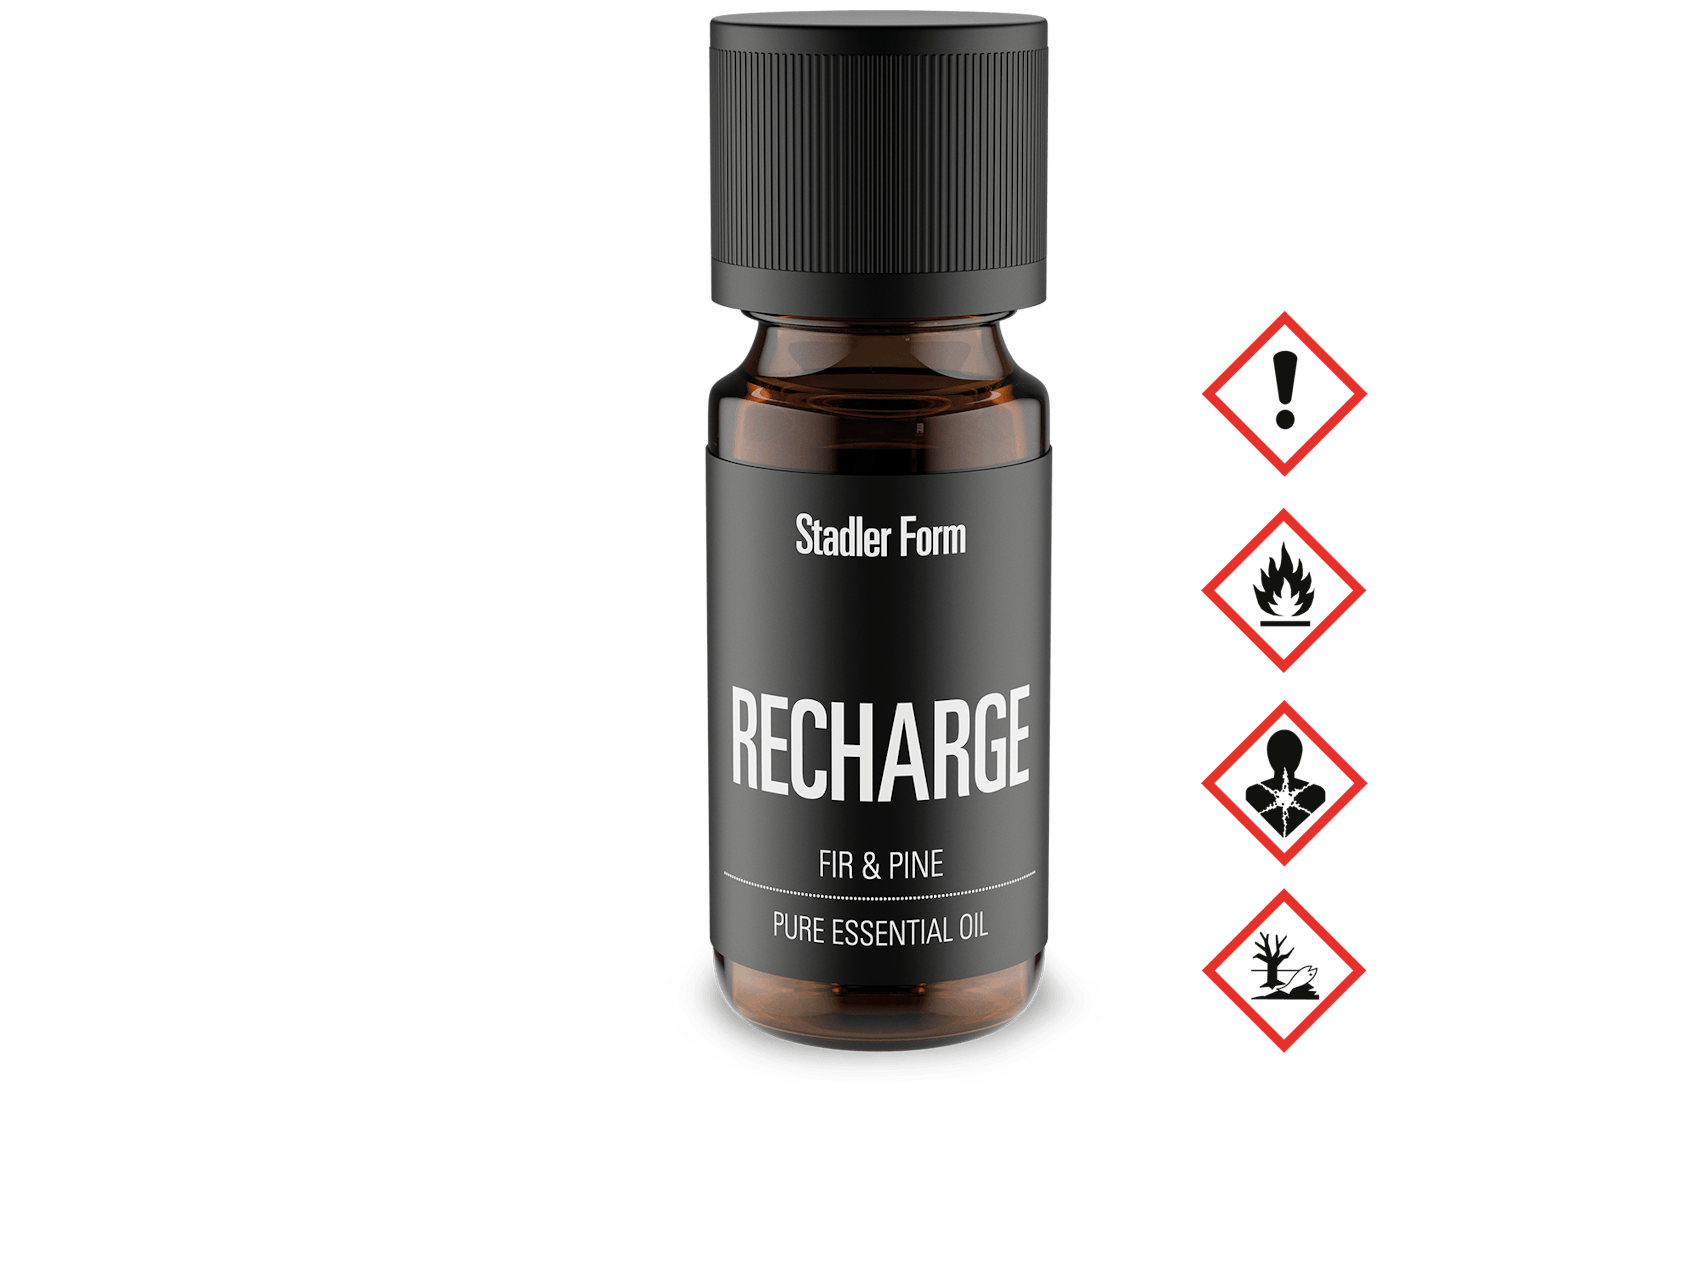 Recharge essential oil by Stadler Form with symbols